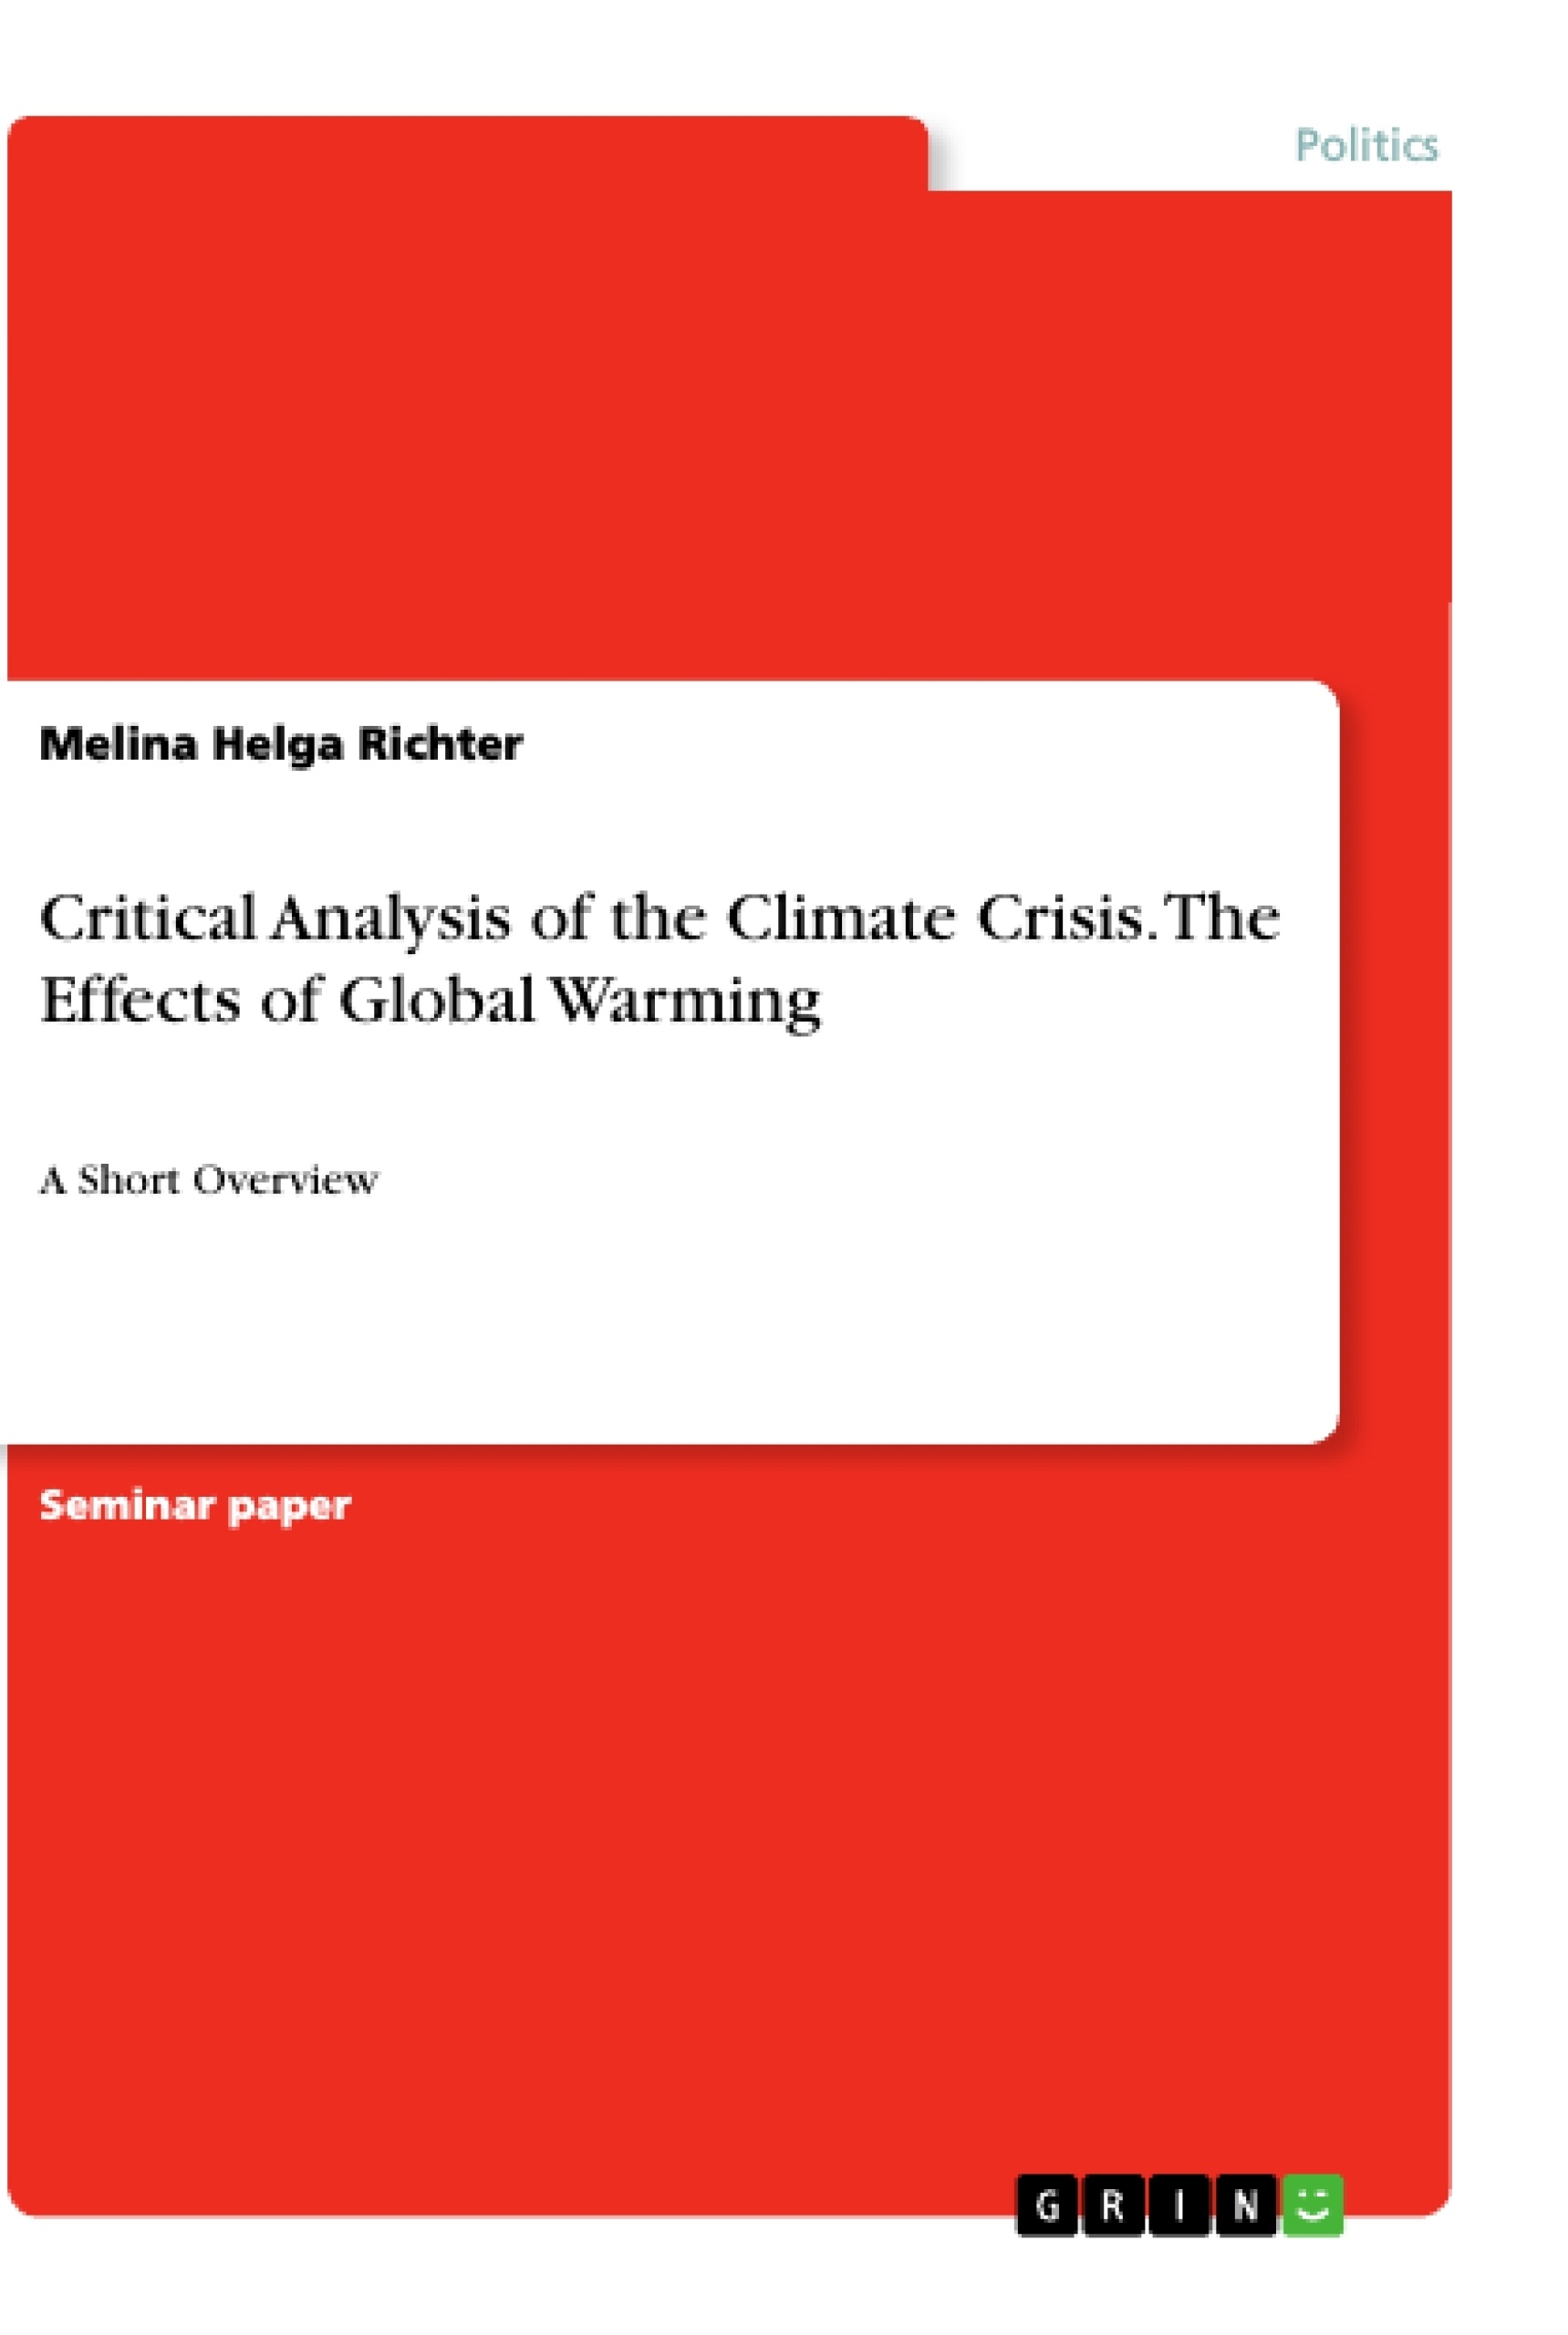 Title: Critical Analysis of the Climate Crisis. The Effects of Global Warming